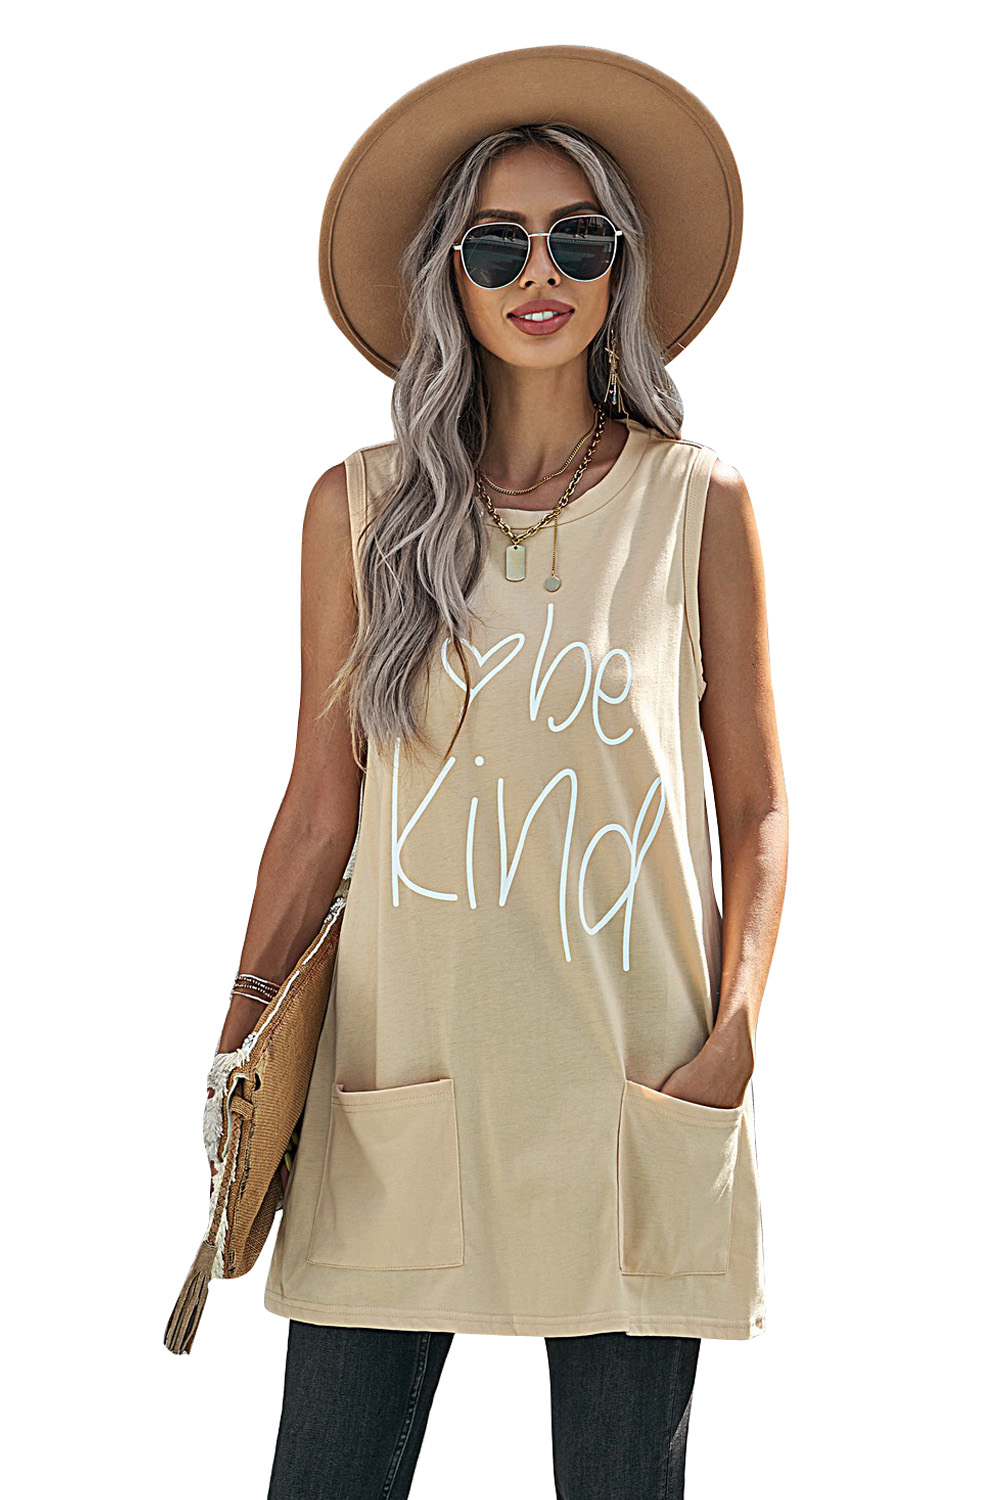 Be Kind Letters Graphic Tank With Pockets